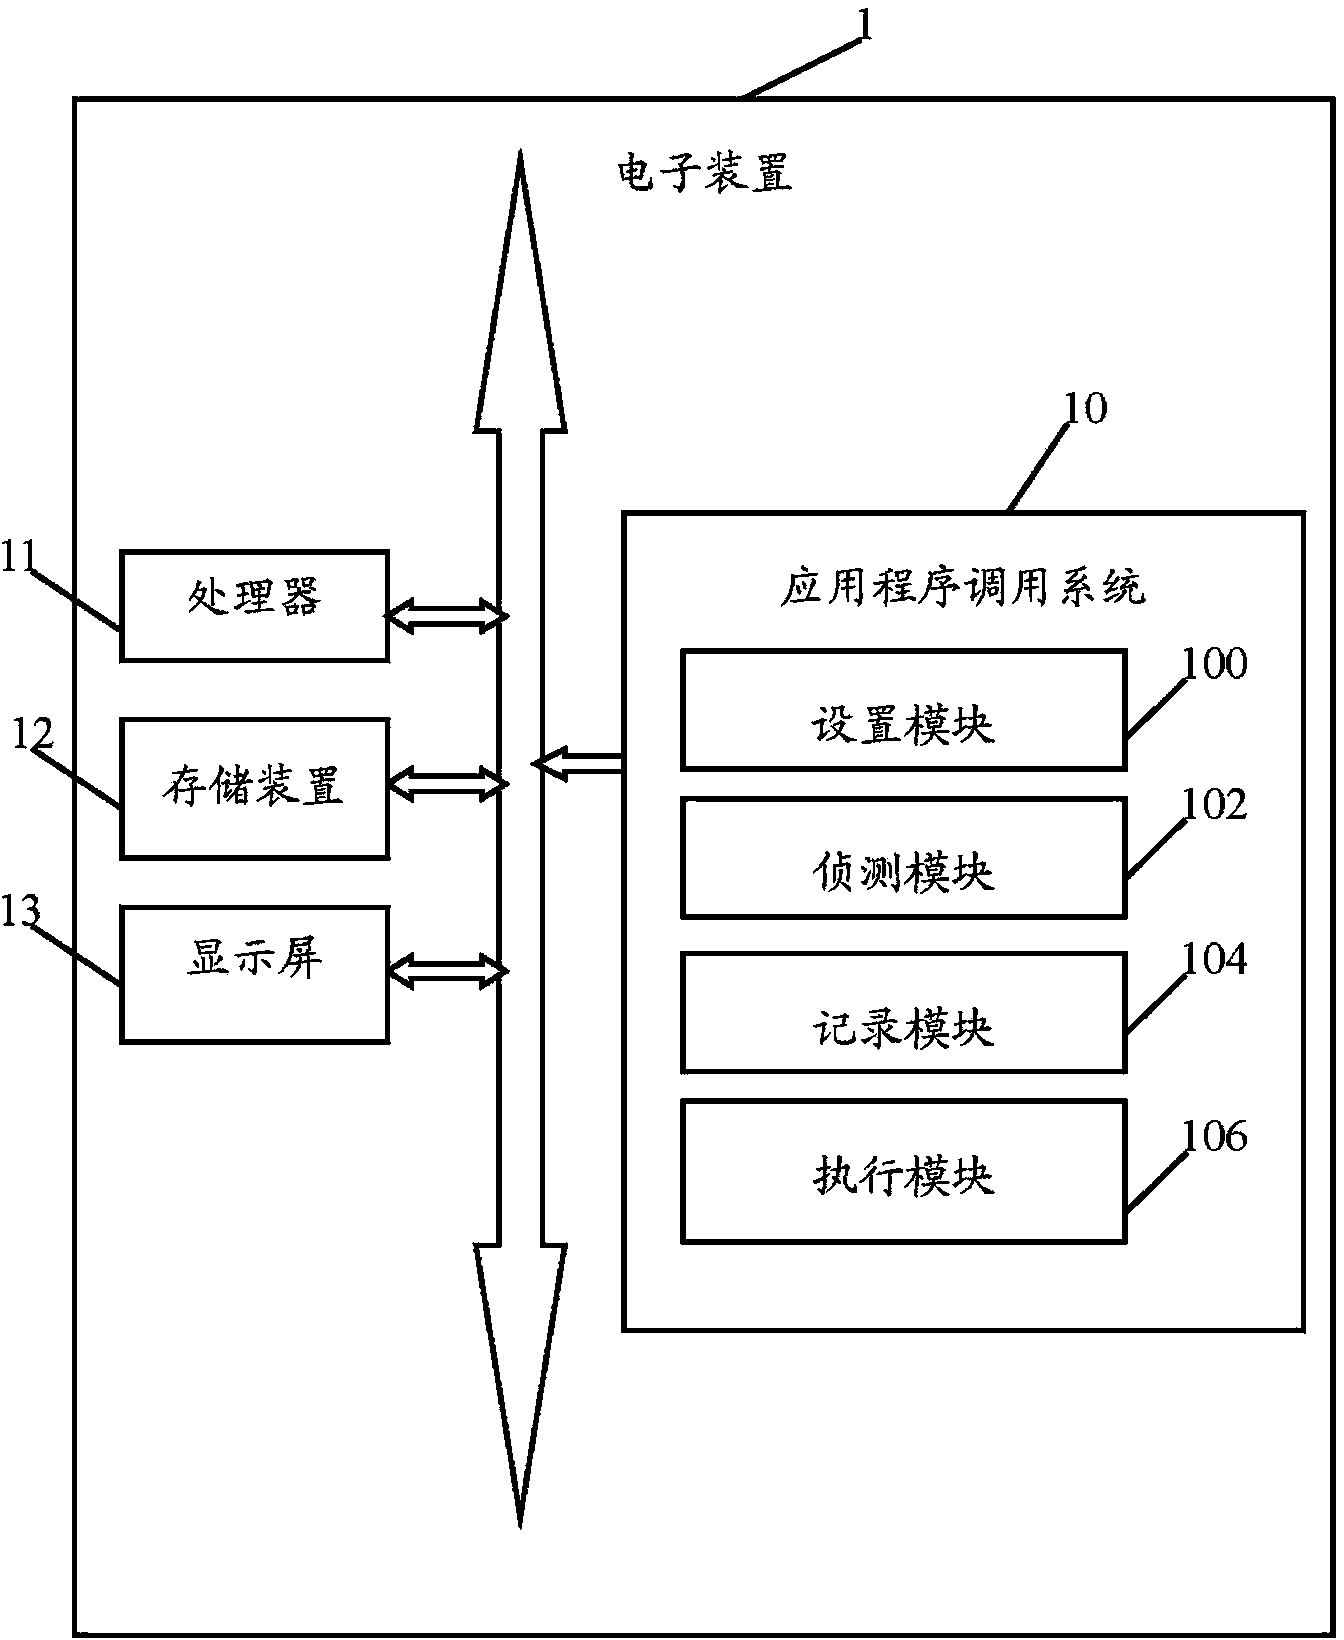 Application program calling system and method